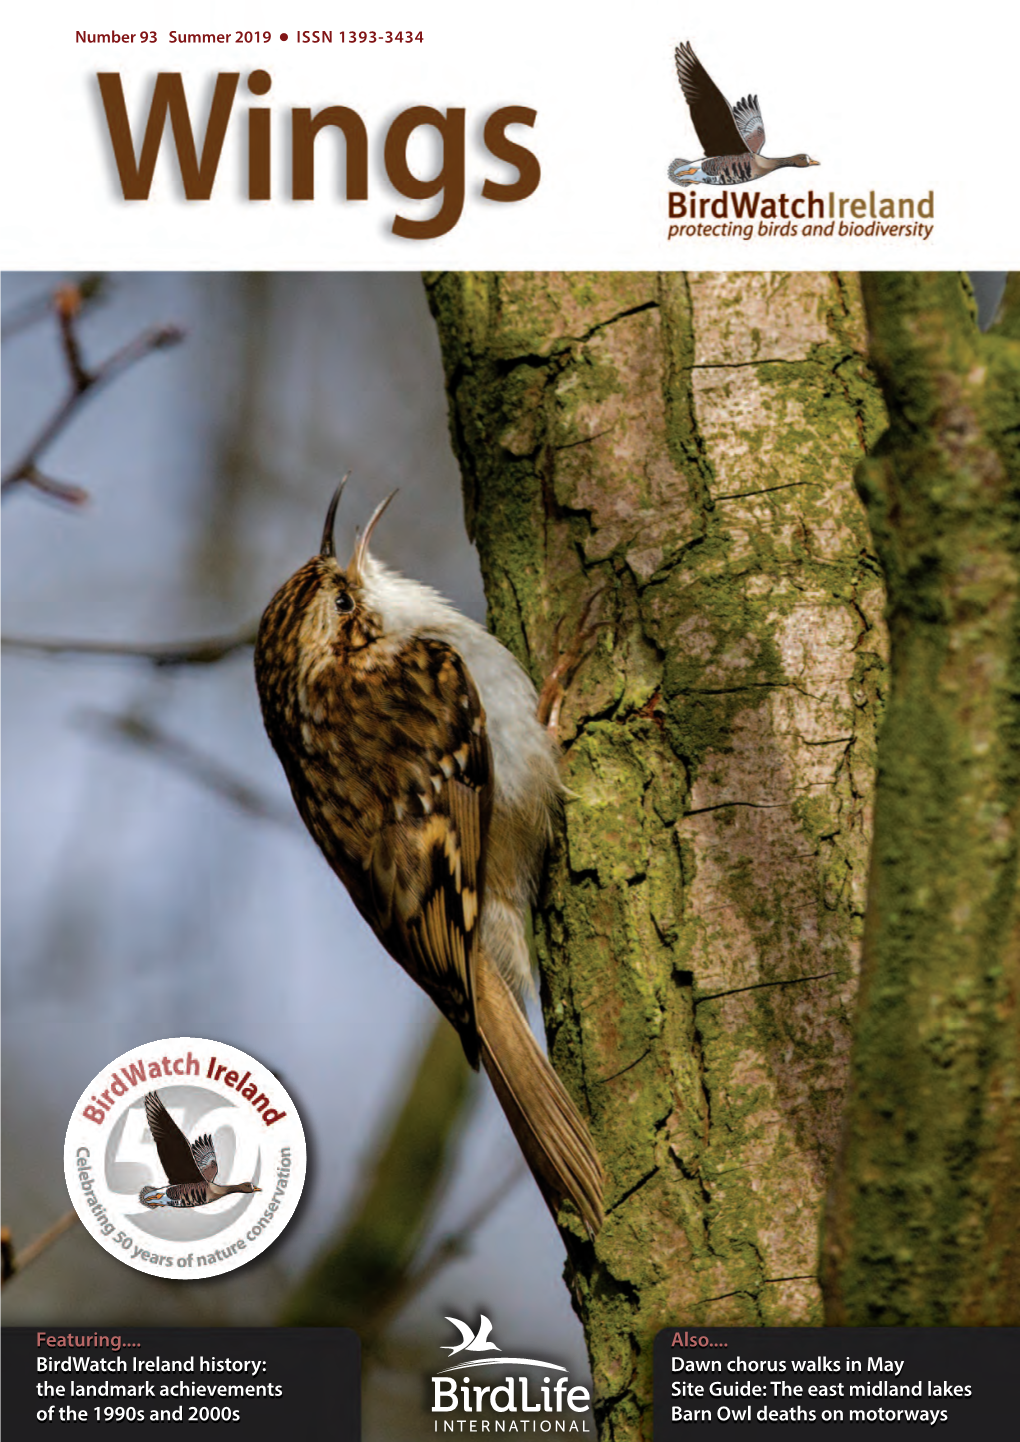 1 1 Also...Dawn Chorus Walks in May Site Guide: The